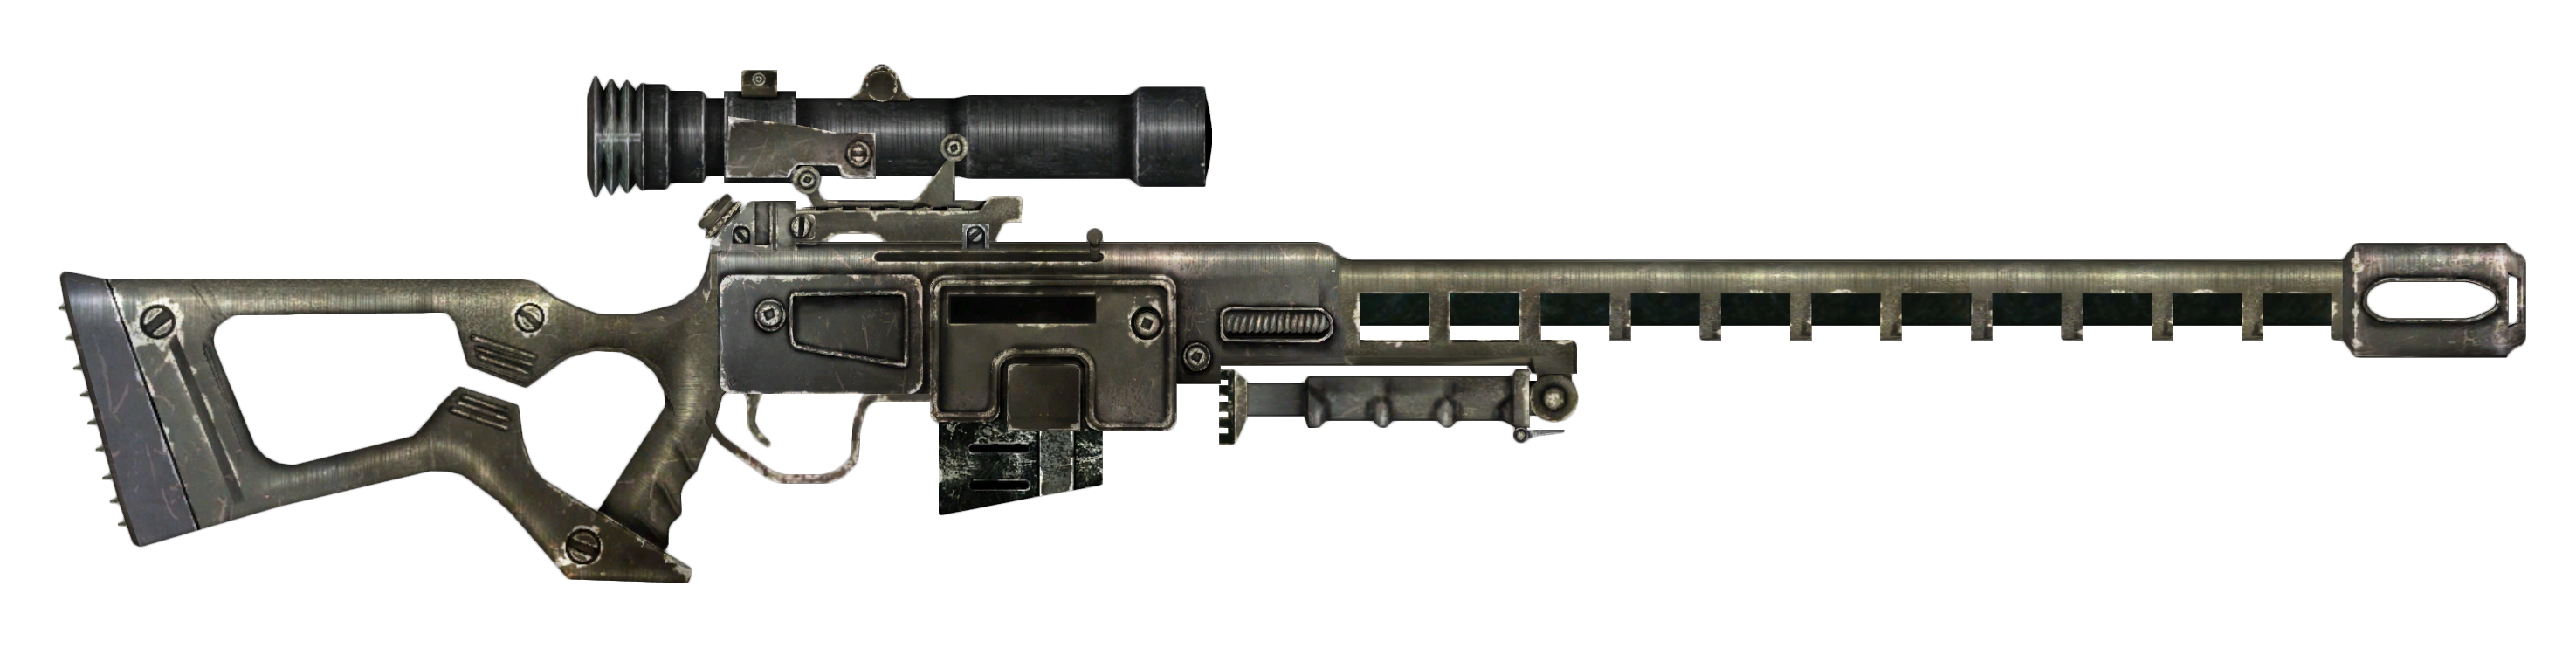 Nice wallpapers Sniper Rifle 2950x750px